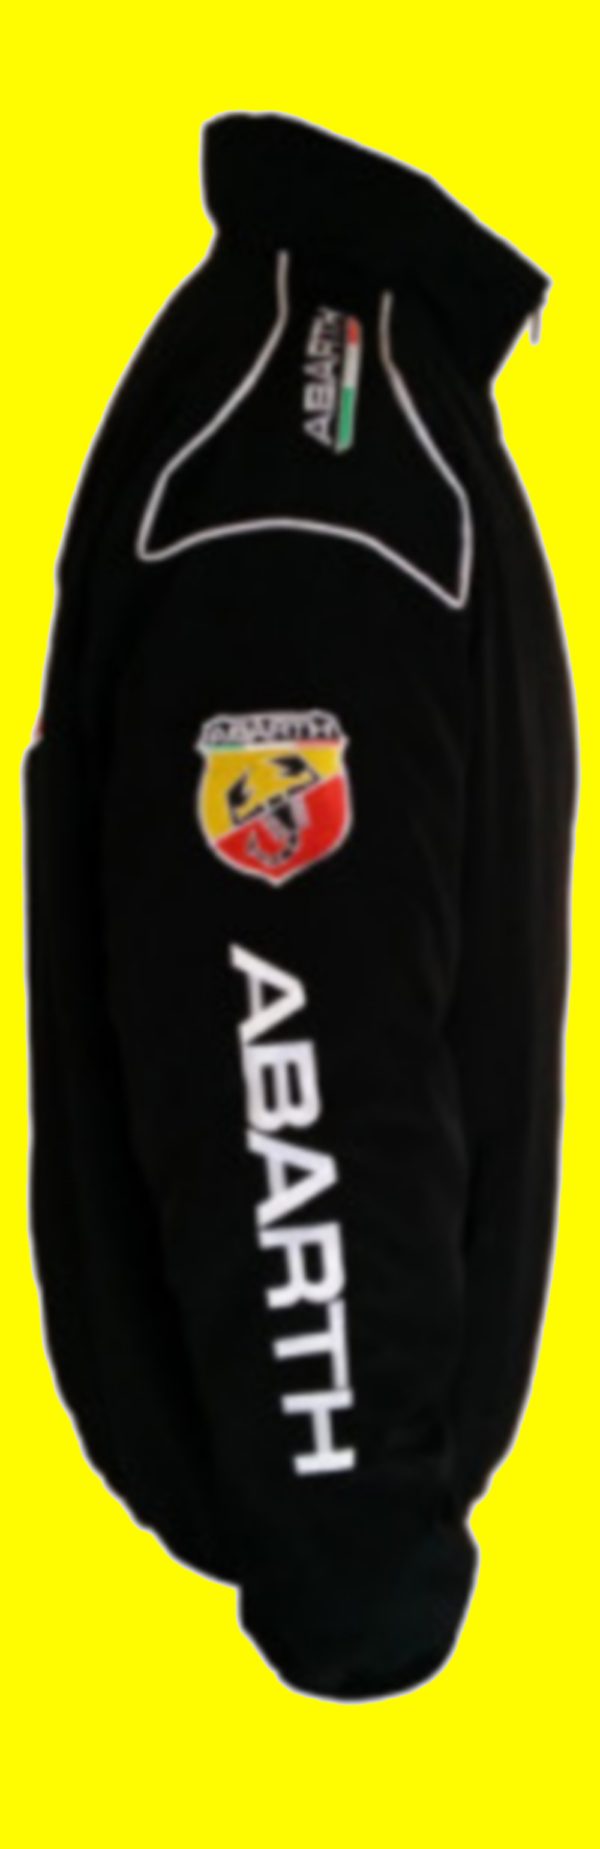 abarth jacket for summer